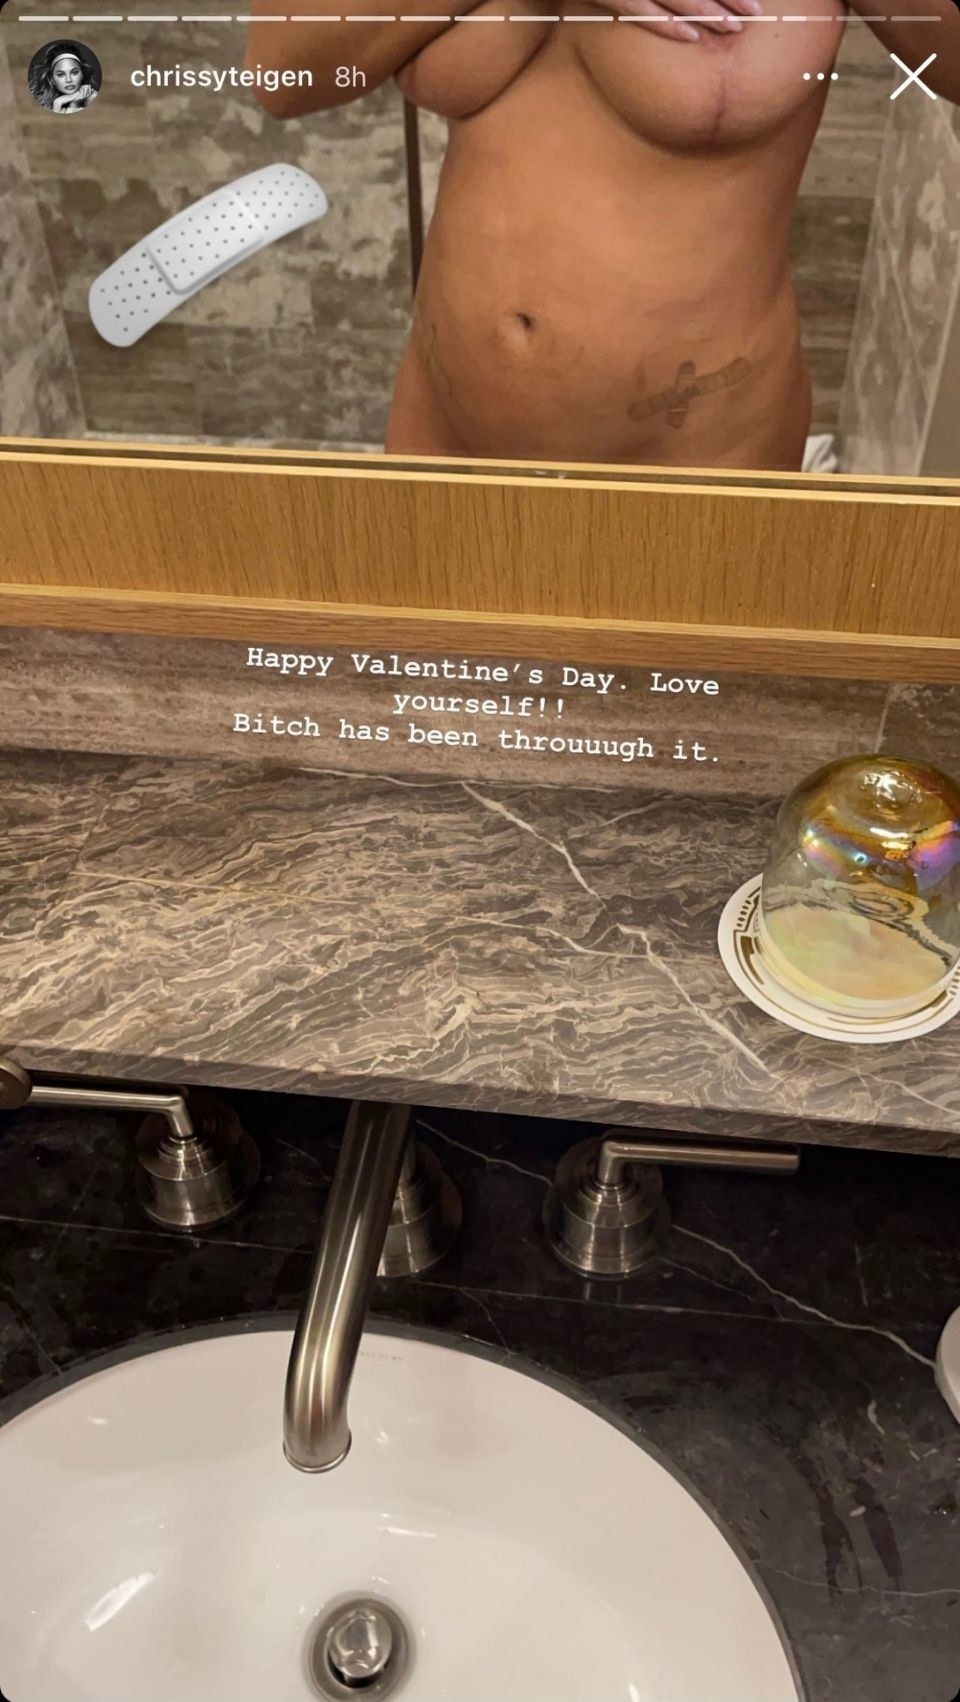 A screen shot of Chrissy&#x27;s Instagram story showing the reflection of her body in the mirror at the bathroom sink, showing an abdominal scar and an incision scar on a breast